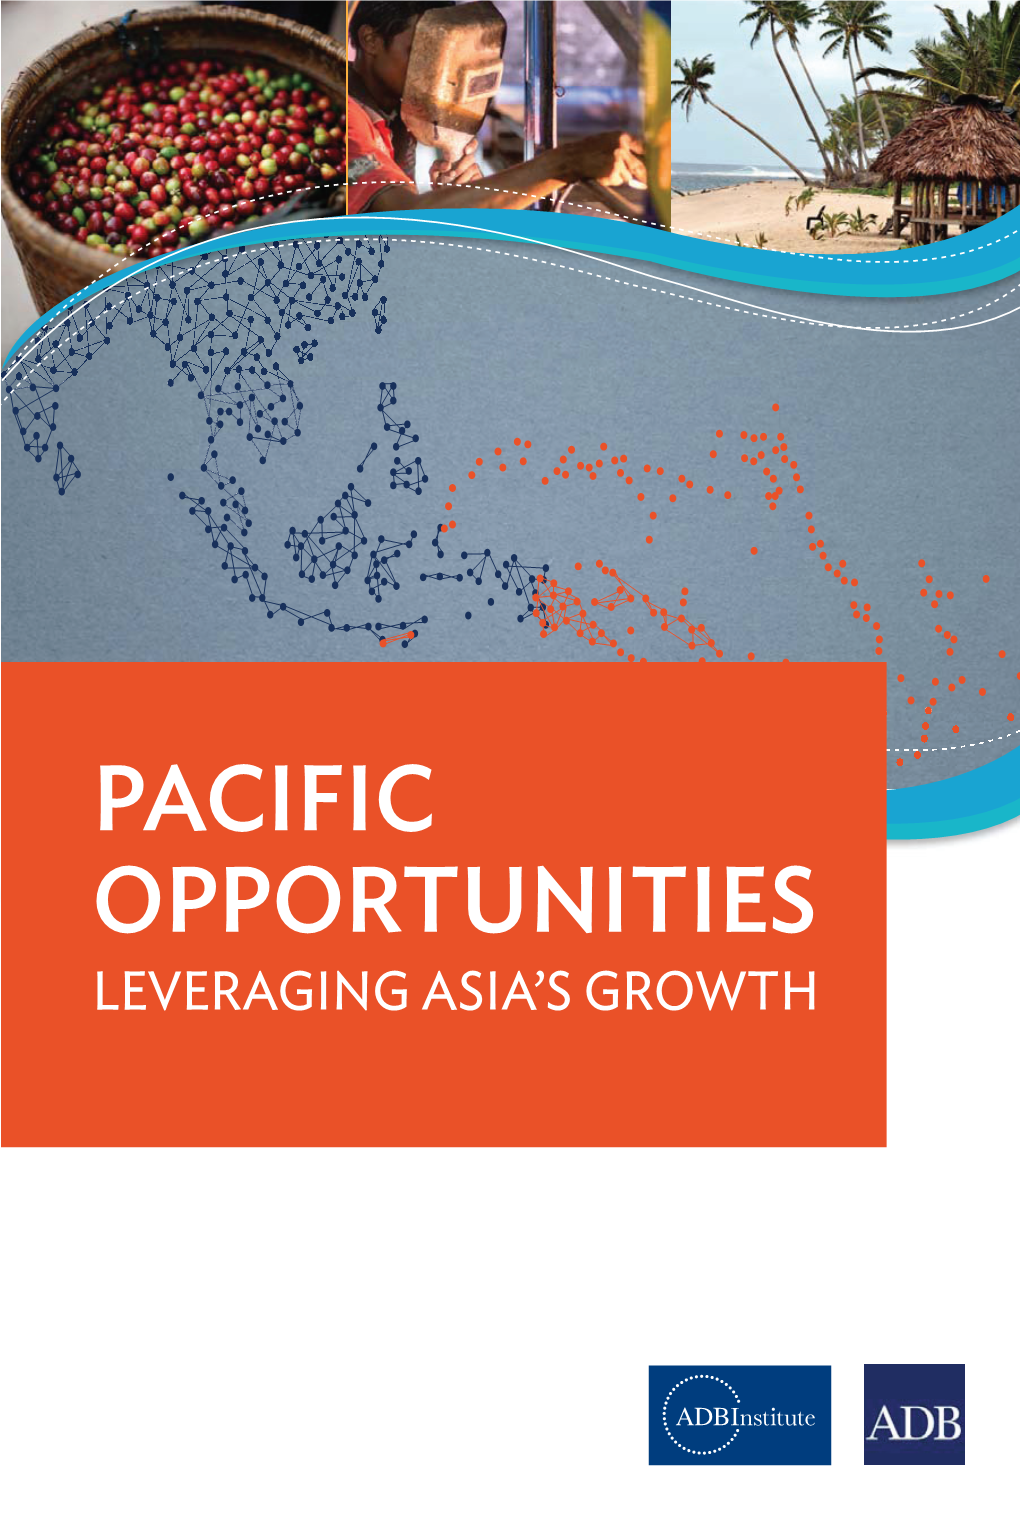 Pacific Opportunities: Leveraging Asia's Growth